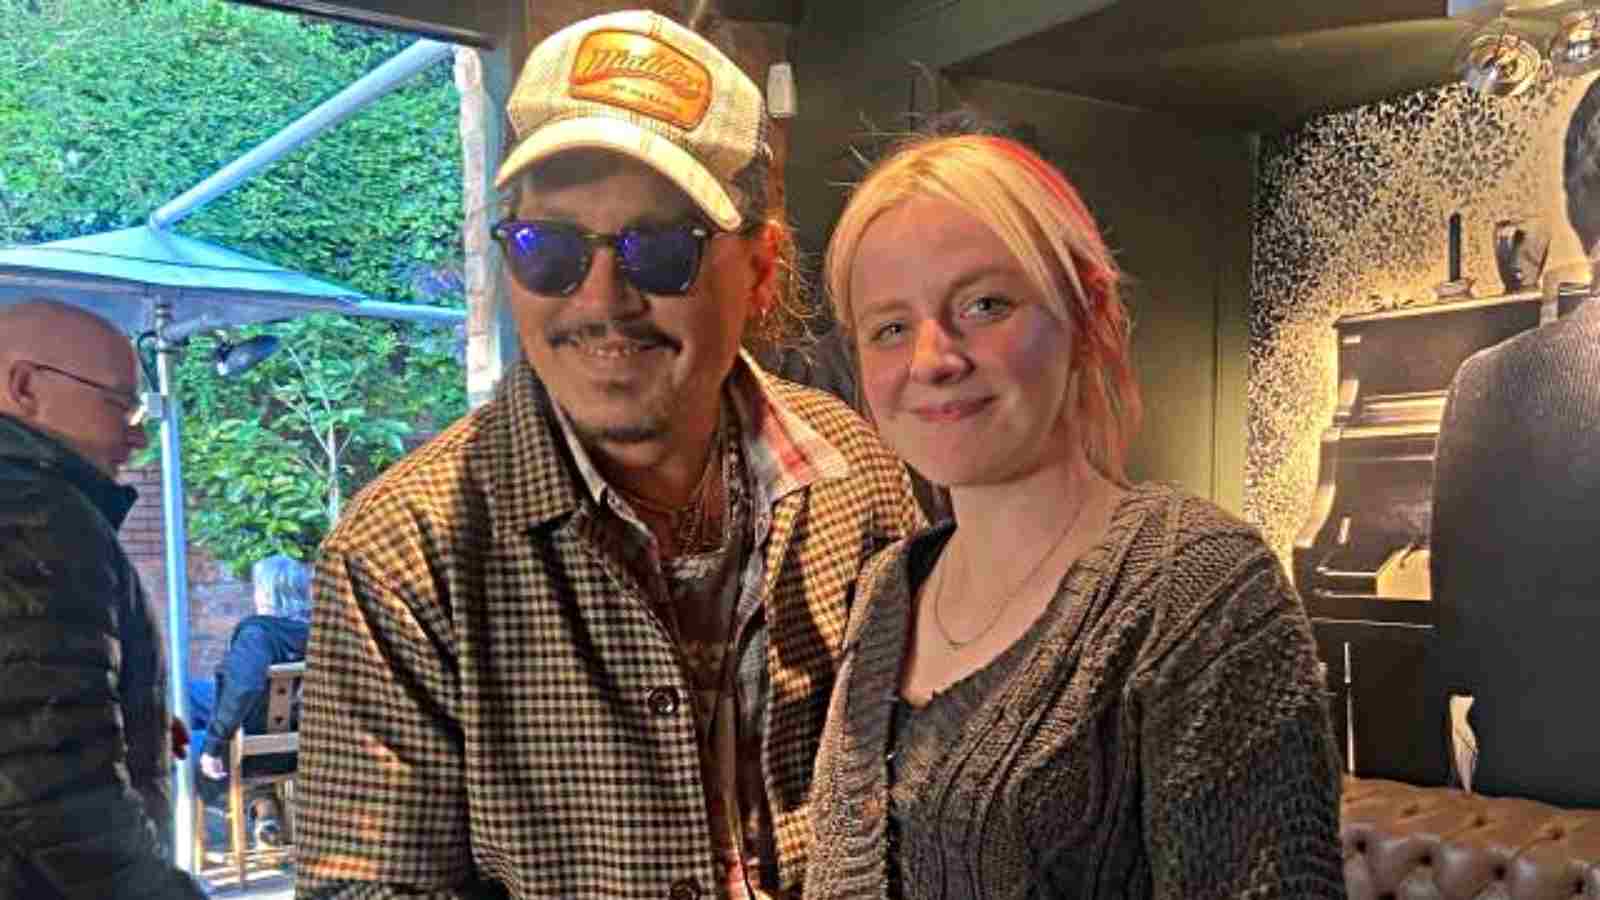 Johnny Depp gives parenting advice to a pregnant bar manager